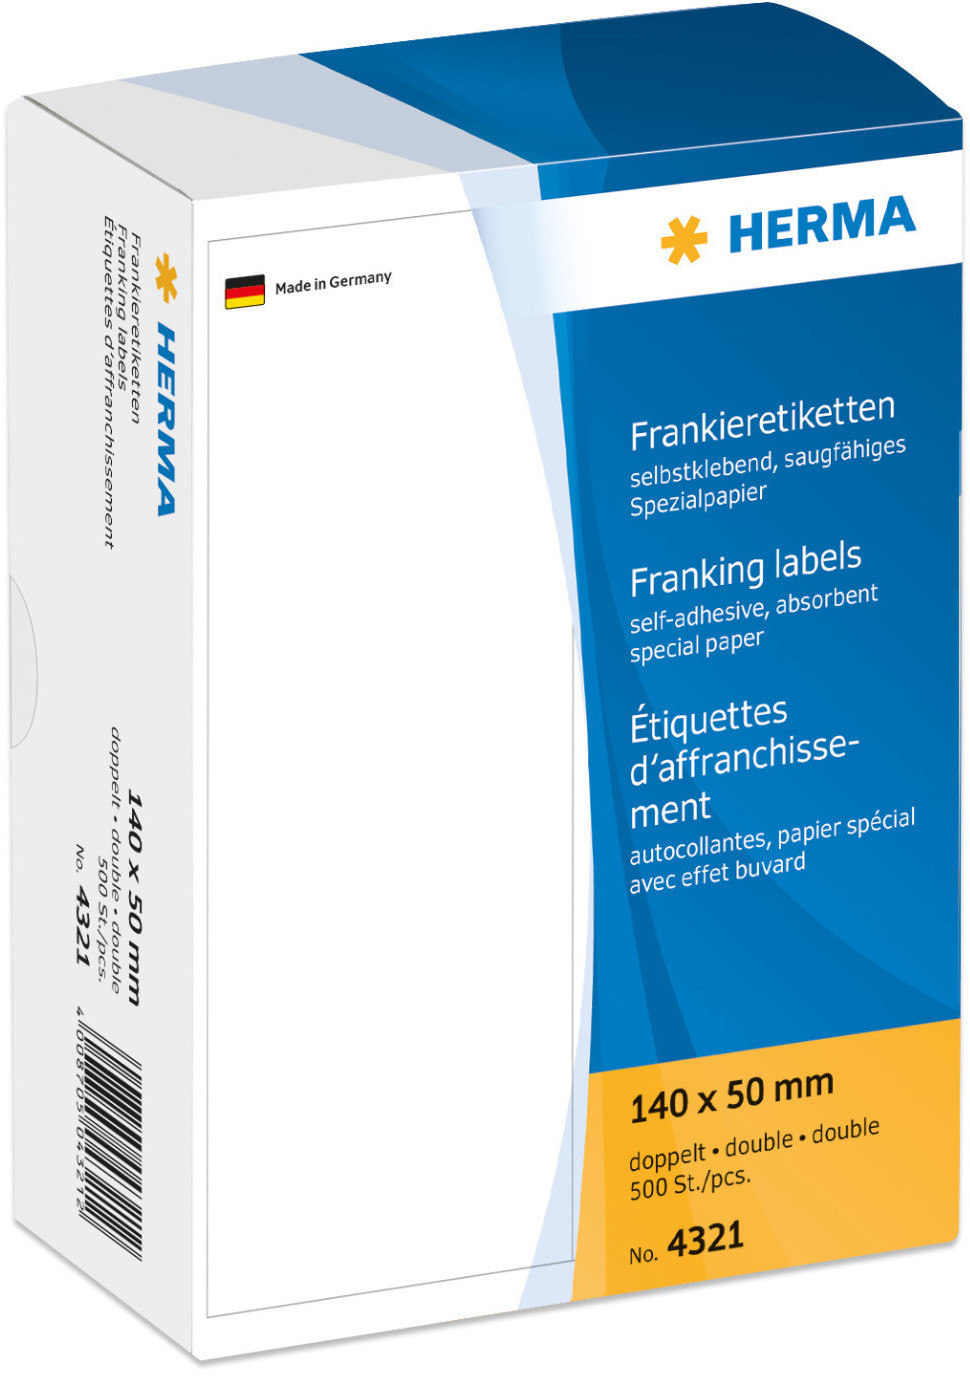 Photos - Other consumables Herma 4321 